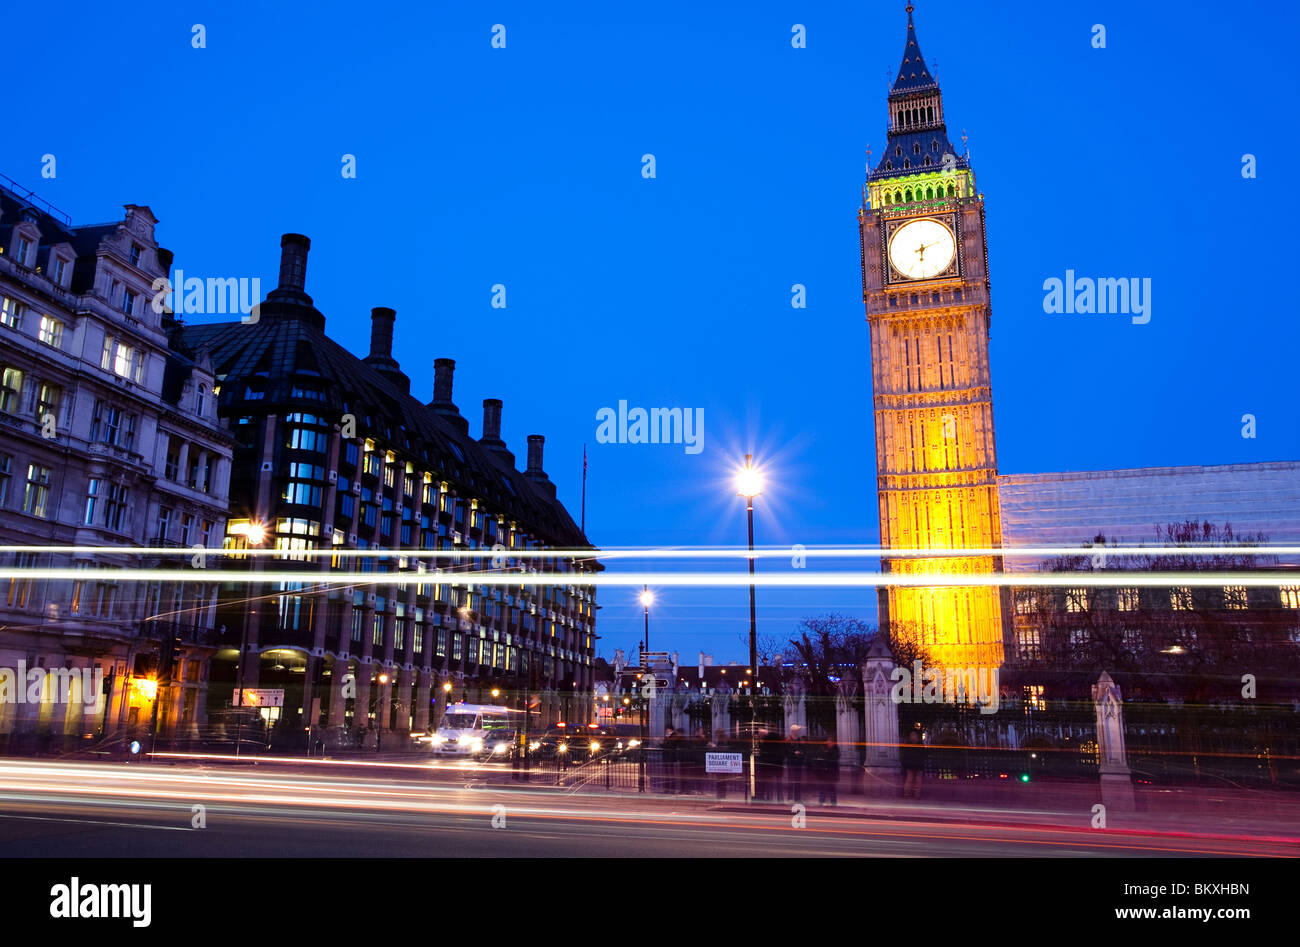 Night shot of Houses of Parliament Stock Photo